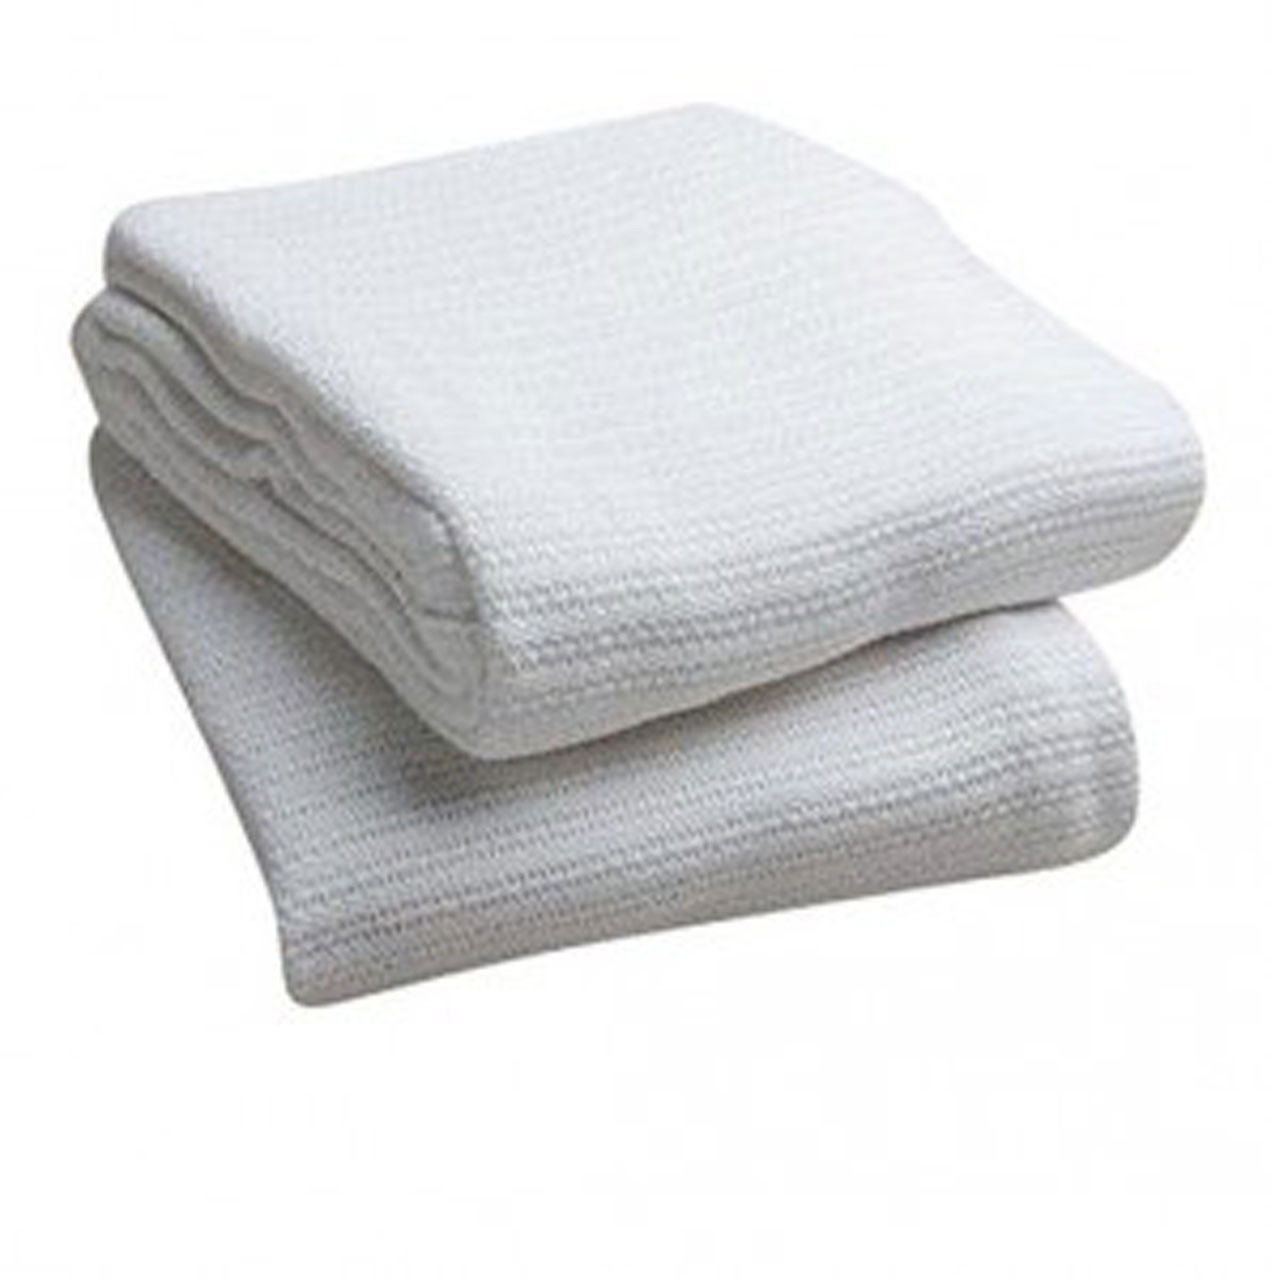 What advantages does the open weave design offer in the cotton open weave blanket?